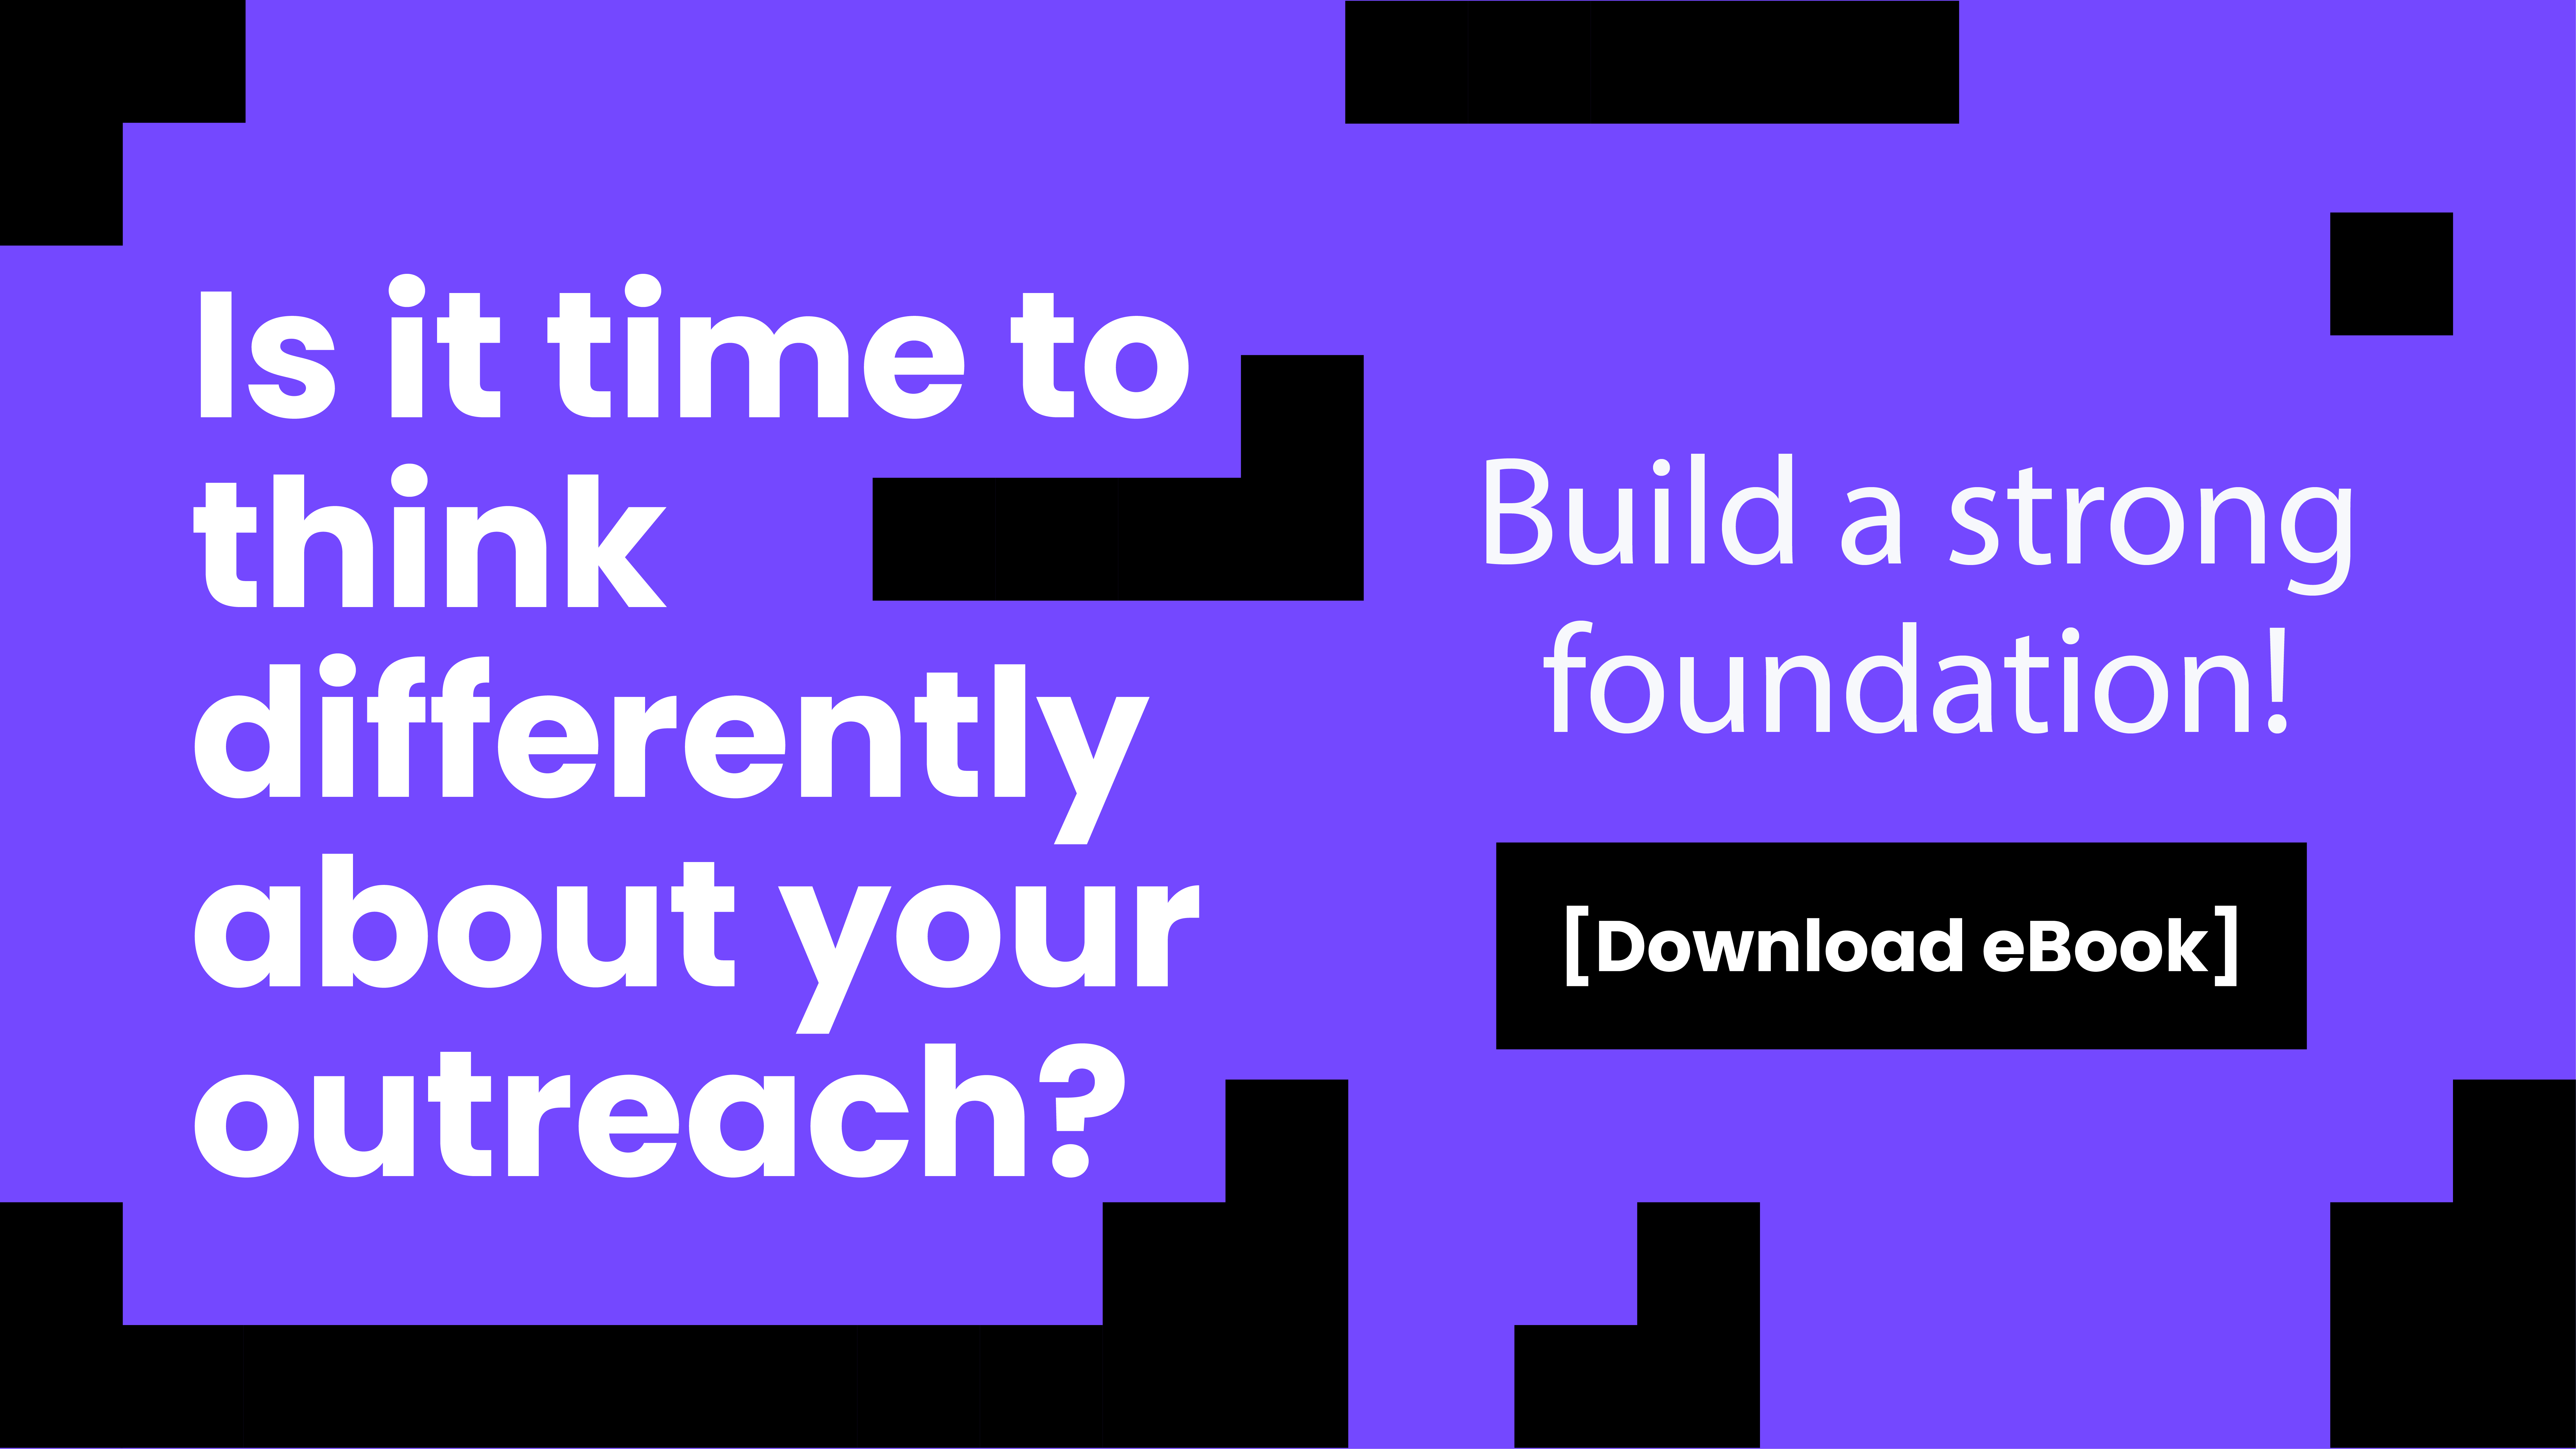 FREE eBook: The building blocks of engaging fundraising communications.